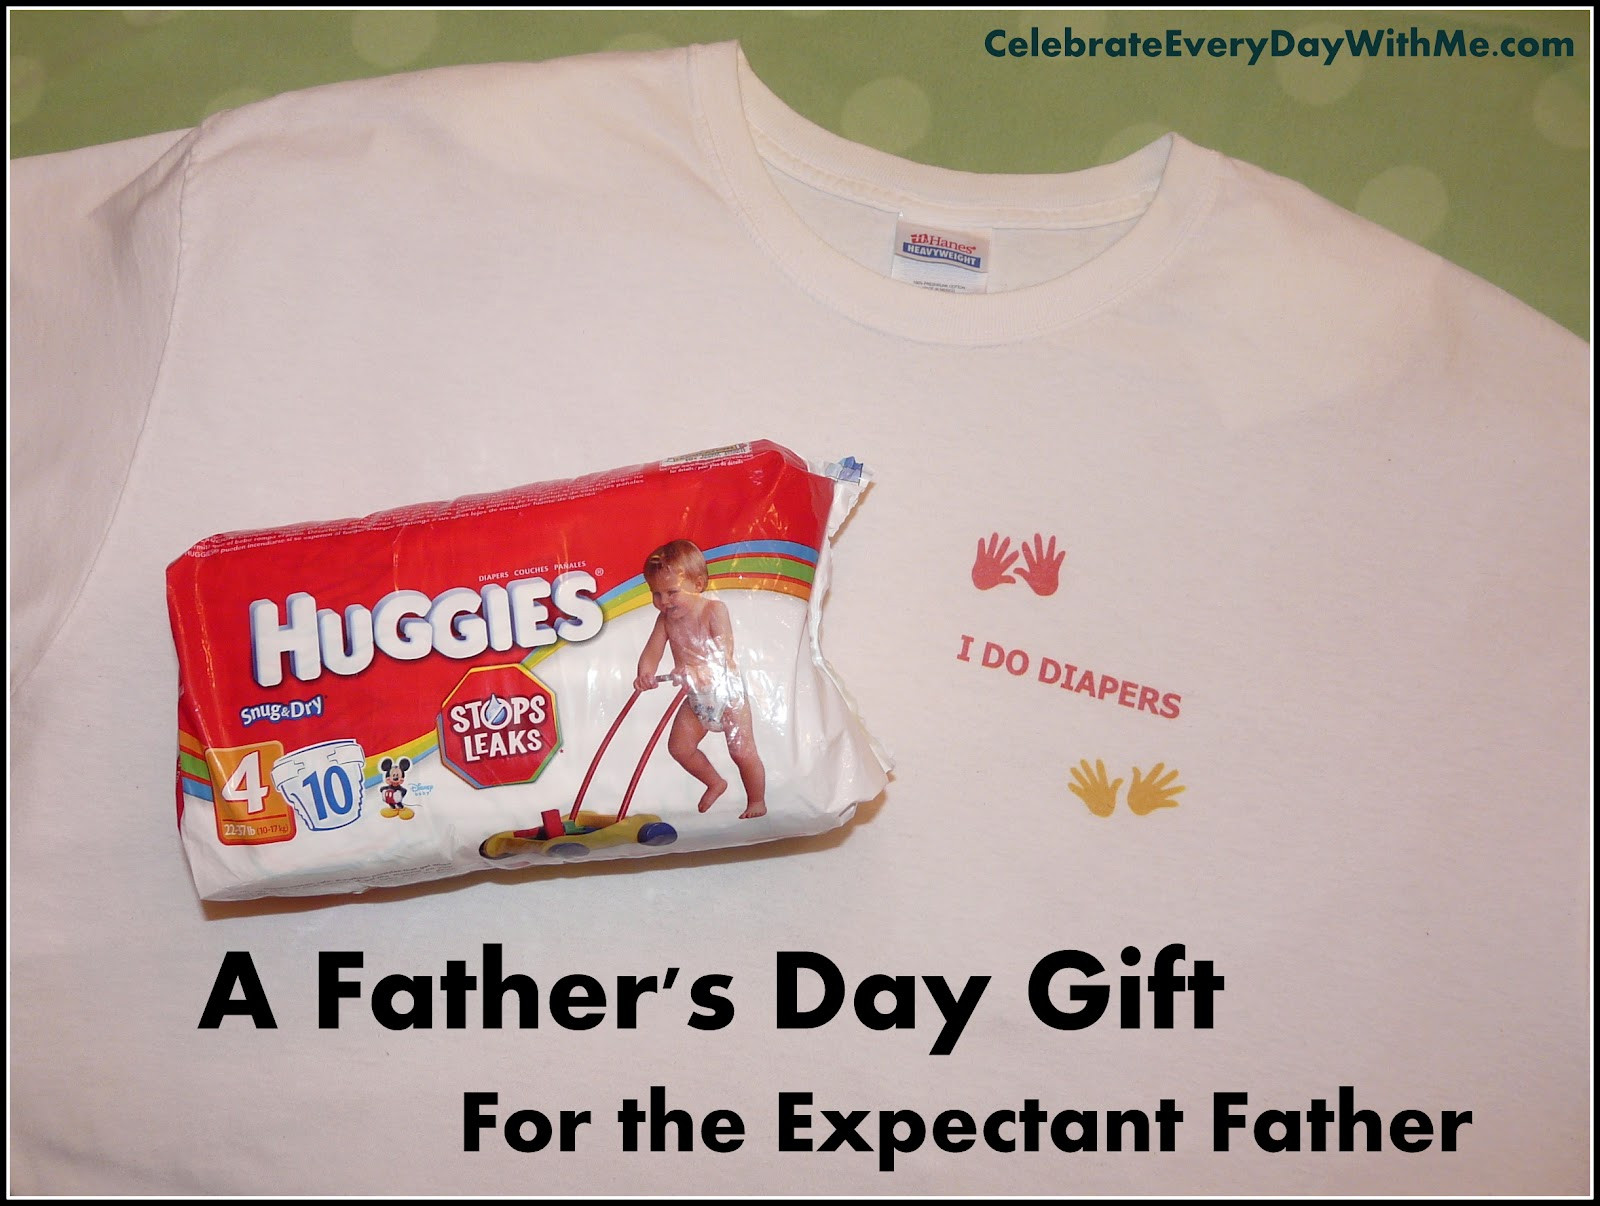 Expecting Fathers Day Gift
 A Father’s Day Gift for the Expectant Father